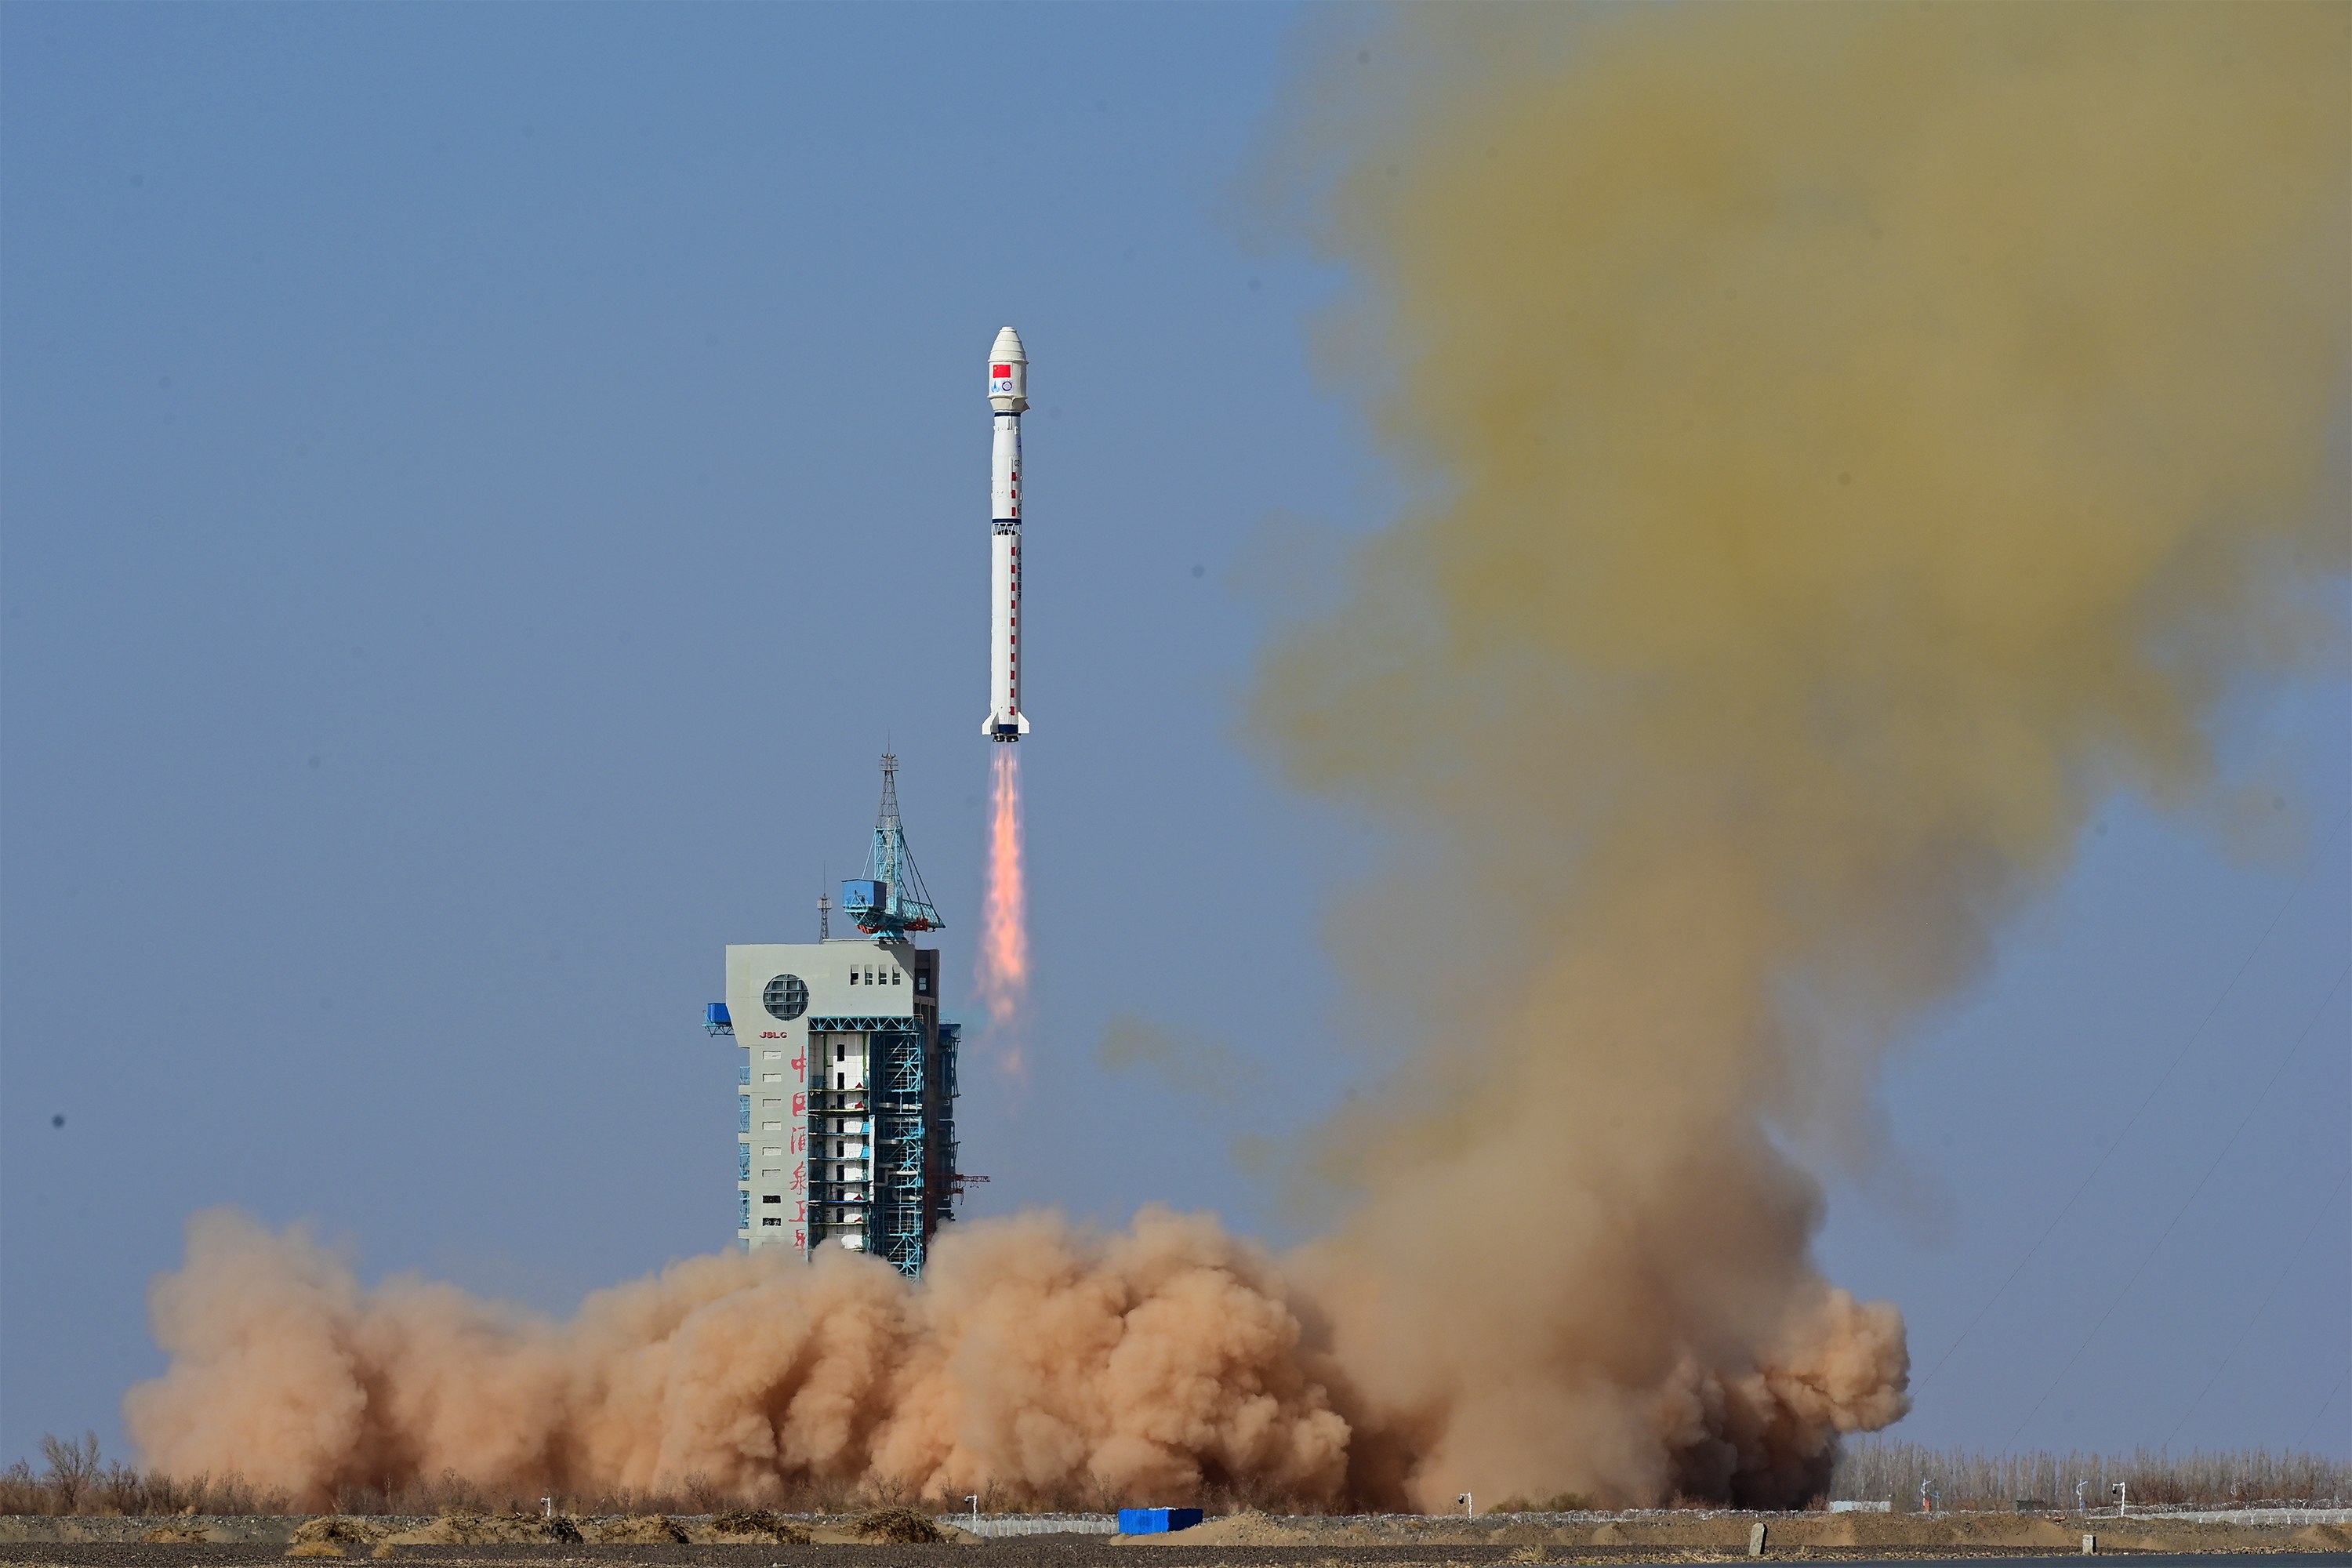 A Long March-4B rocket carrying a satellite blasts off from a space centre in Jiuquan, China on Sunday. Photo: Xinhua/EPA-EFE